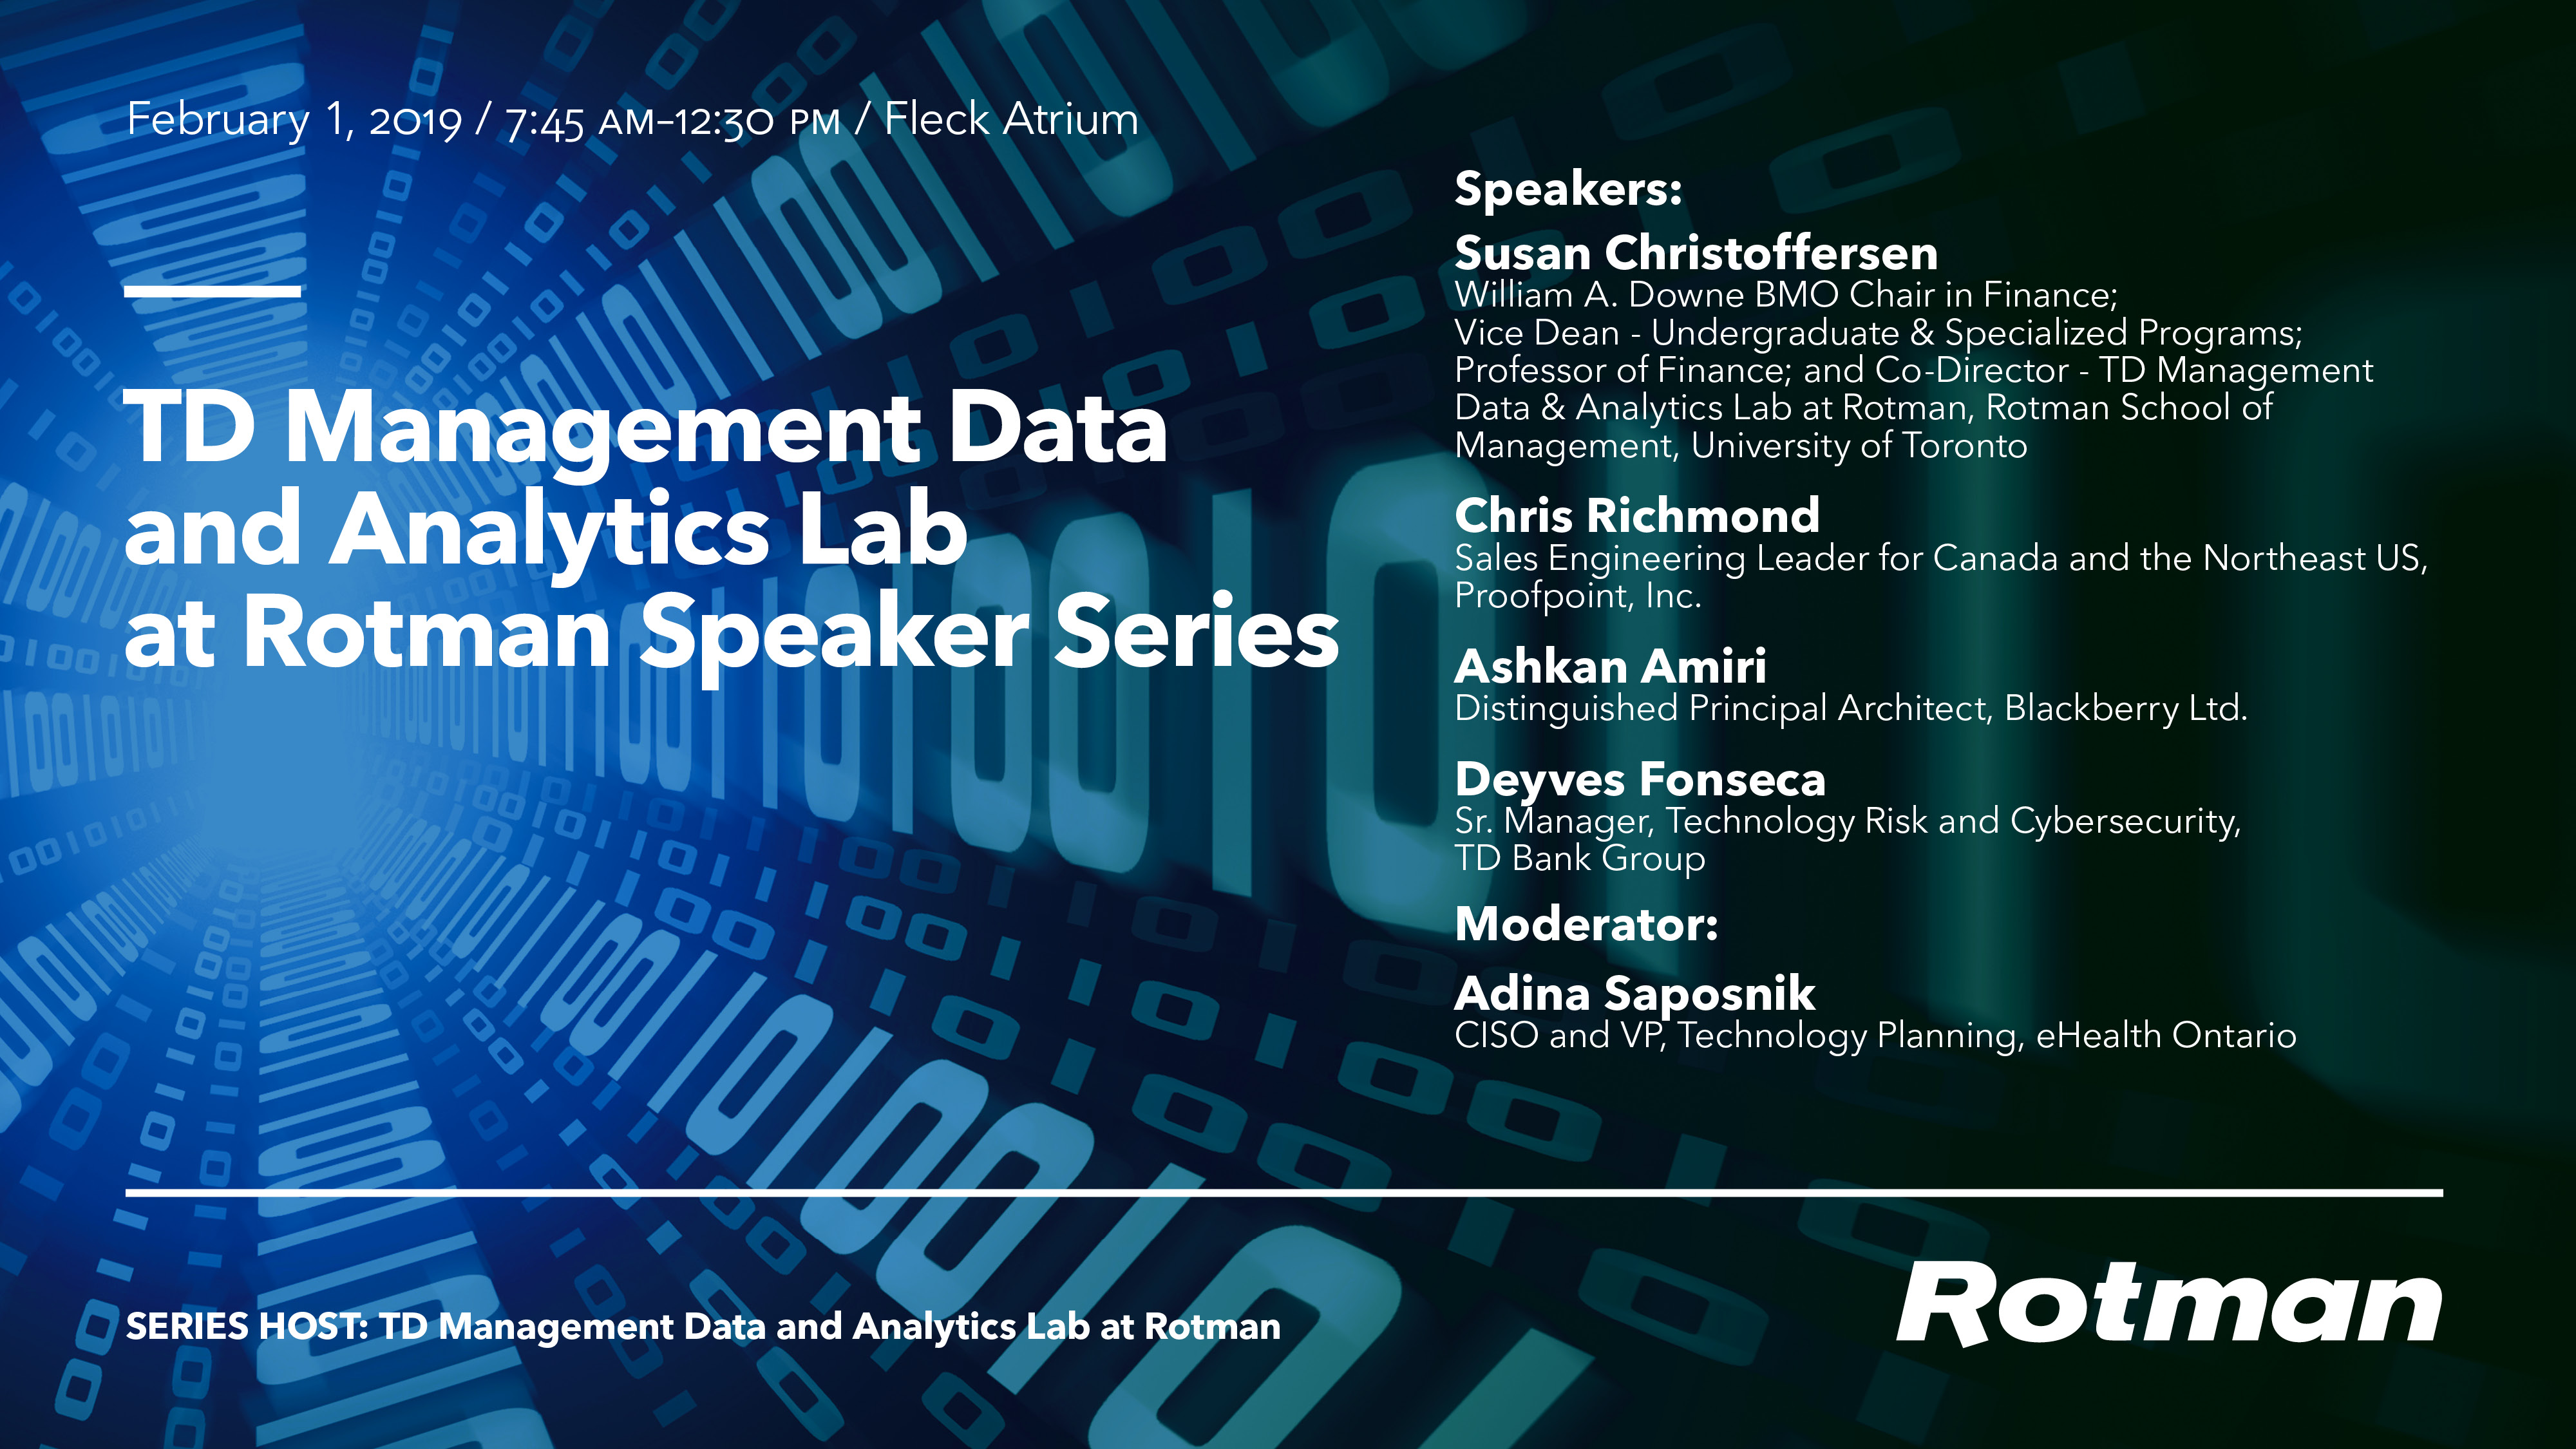 Image representing the TD Management Data and Analytics Lab at Rotman Speaker Series